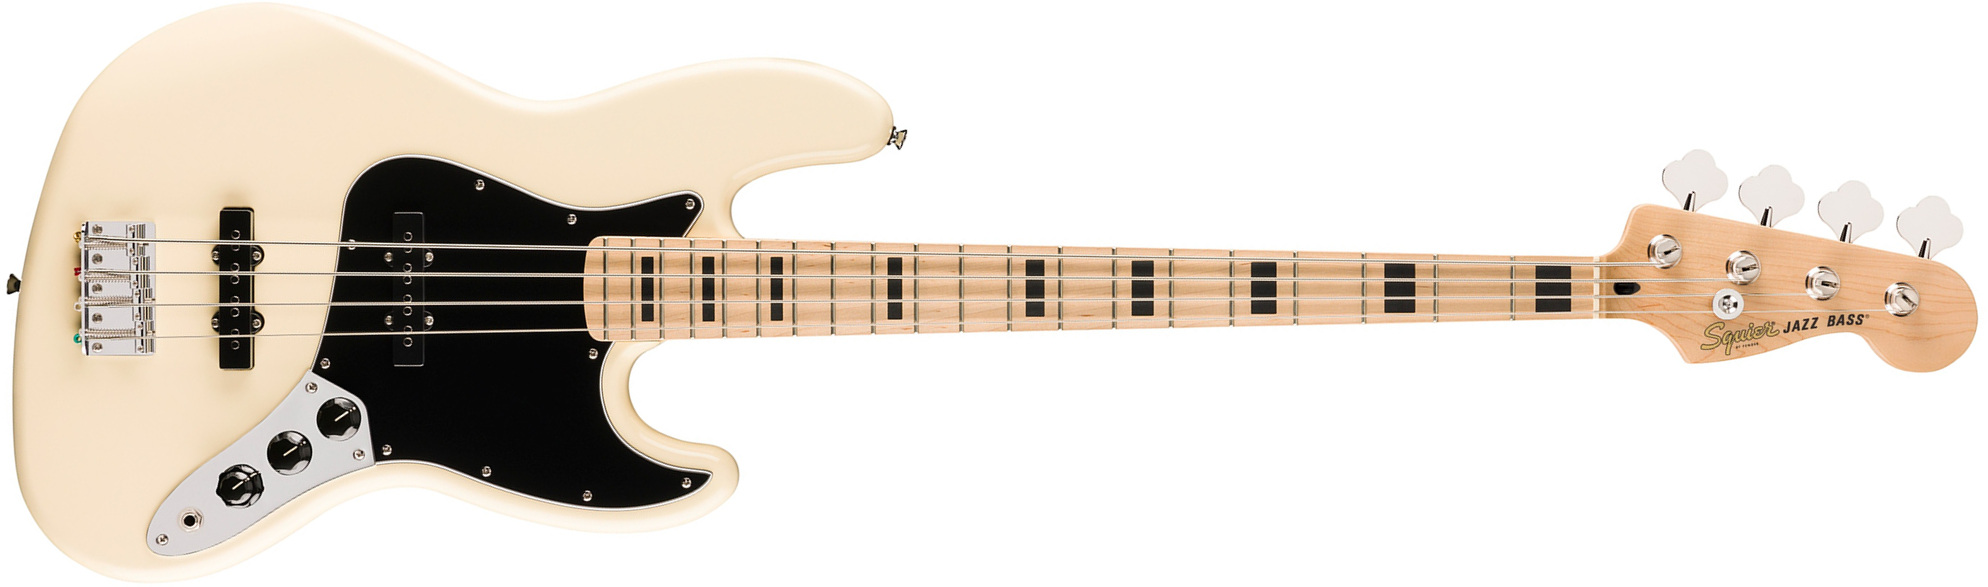 Squier Jazz Bass Active Affinity Mn - Olympic White - Basse Électrique Solid Body - Main picture